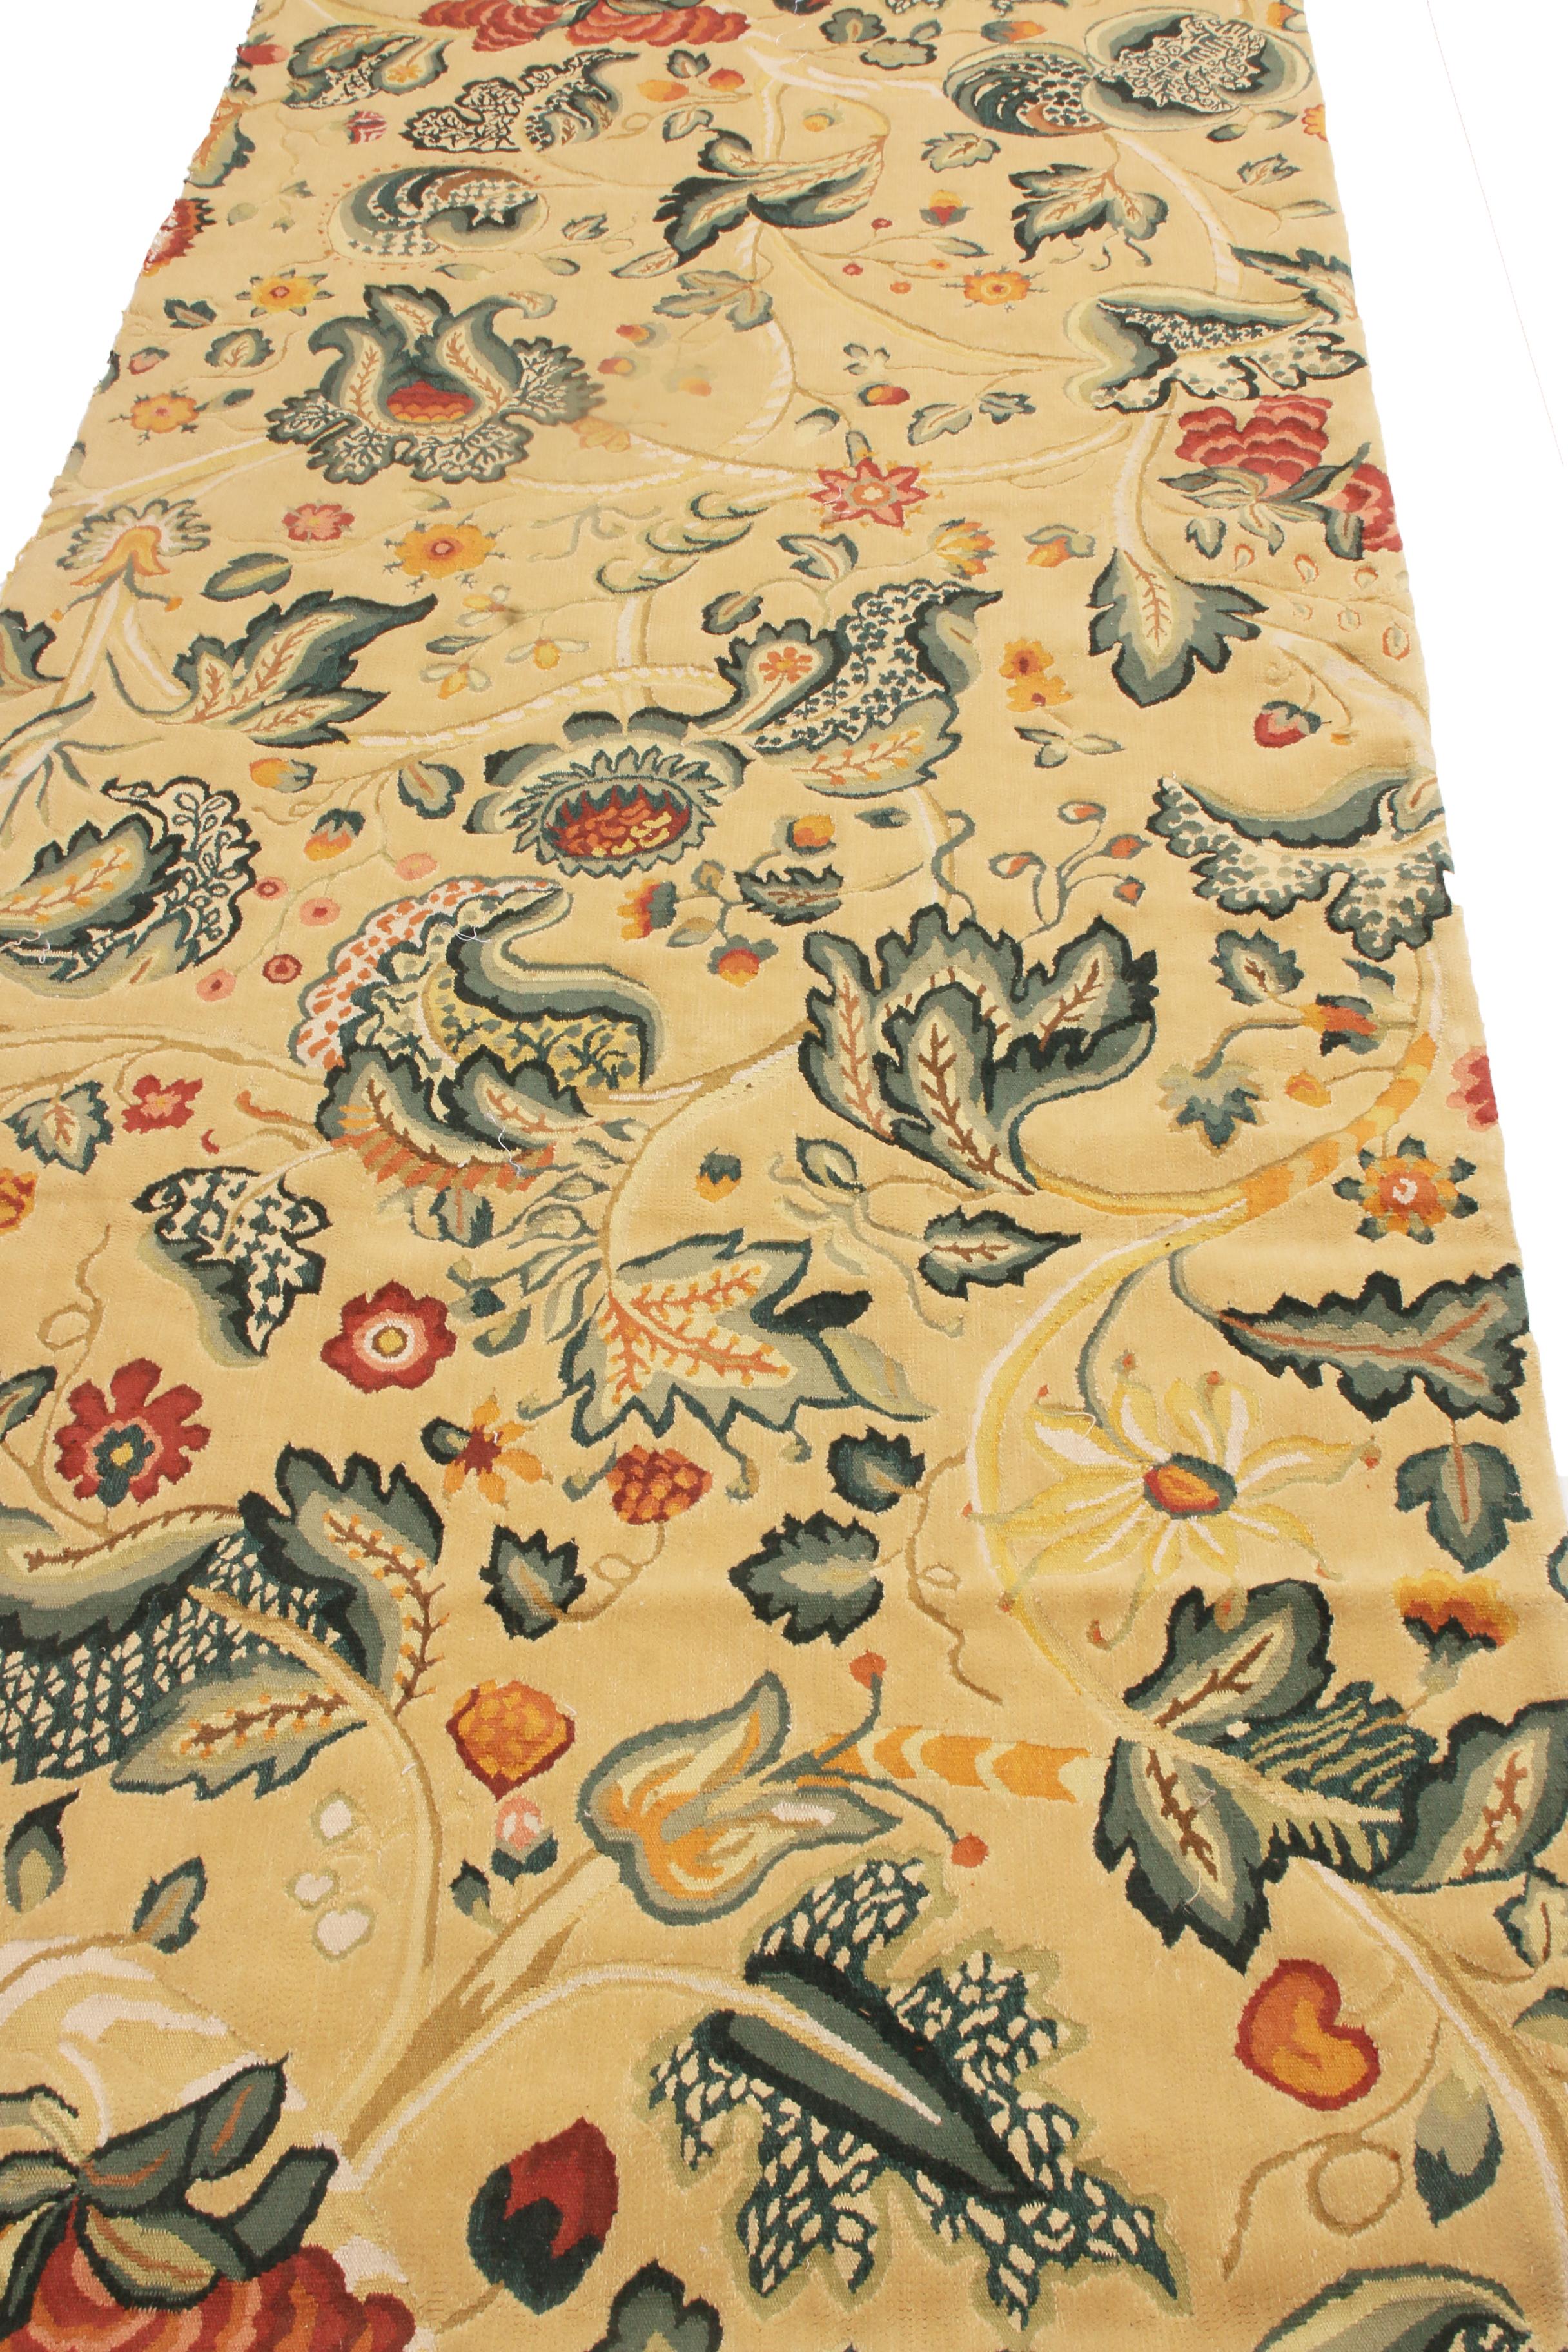 Originating from China, this hand knotted floral runner was inspired by 18th century antique Tudor floral rug designs, embracing a borderless, all over field design with swapping curvilinear green, red, and golden-yellow floral garlands against a